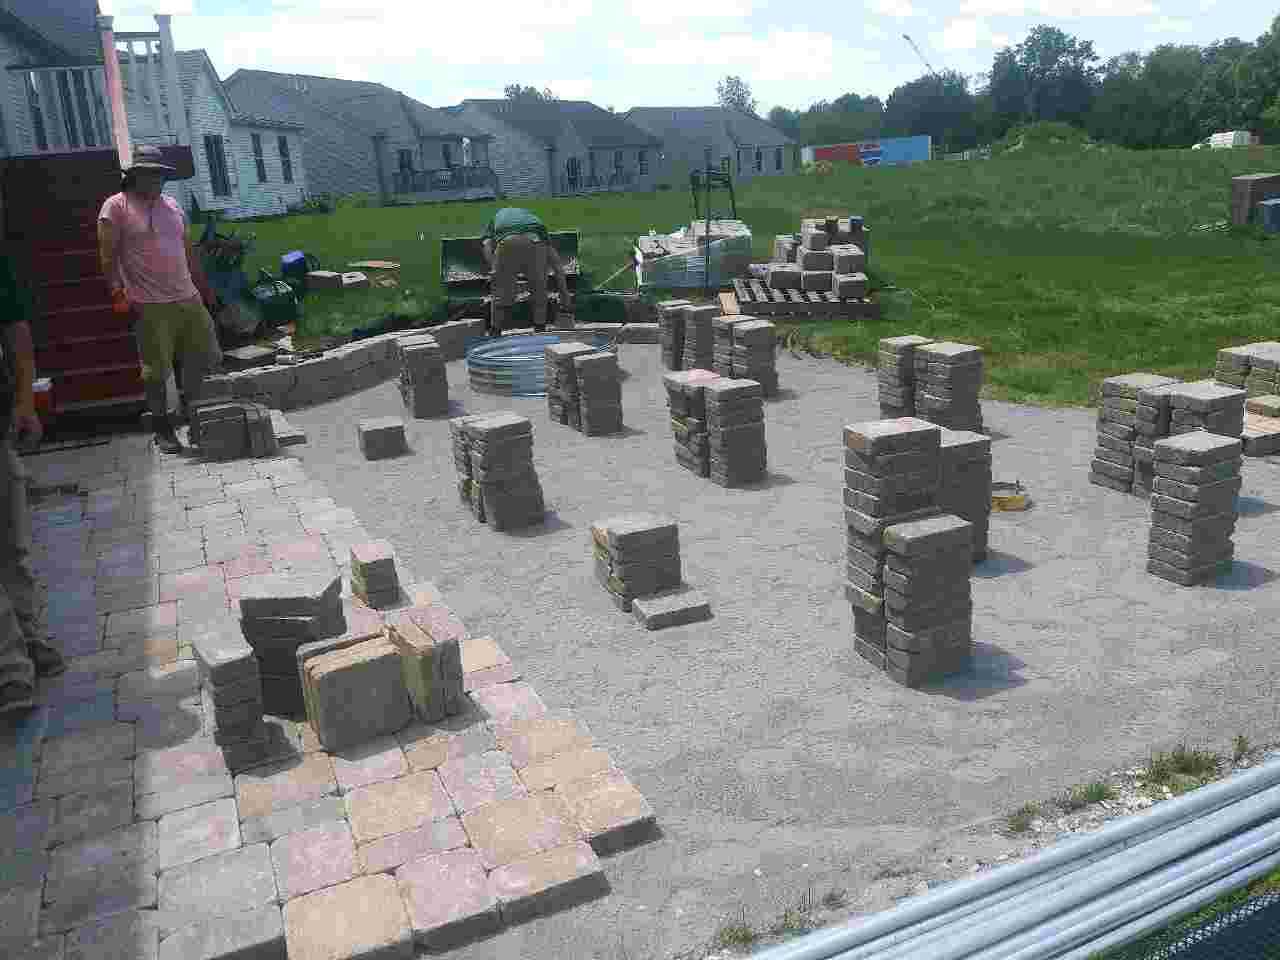 Installing paver patio and landscape in a backyard.